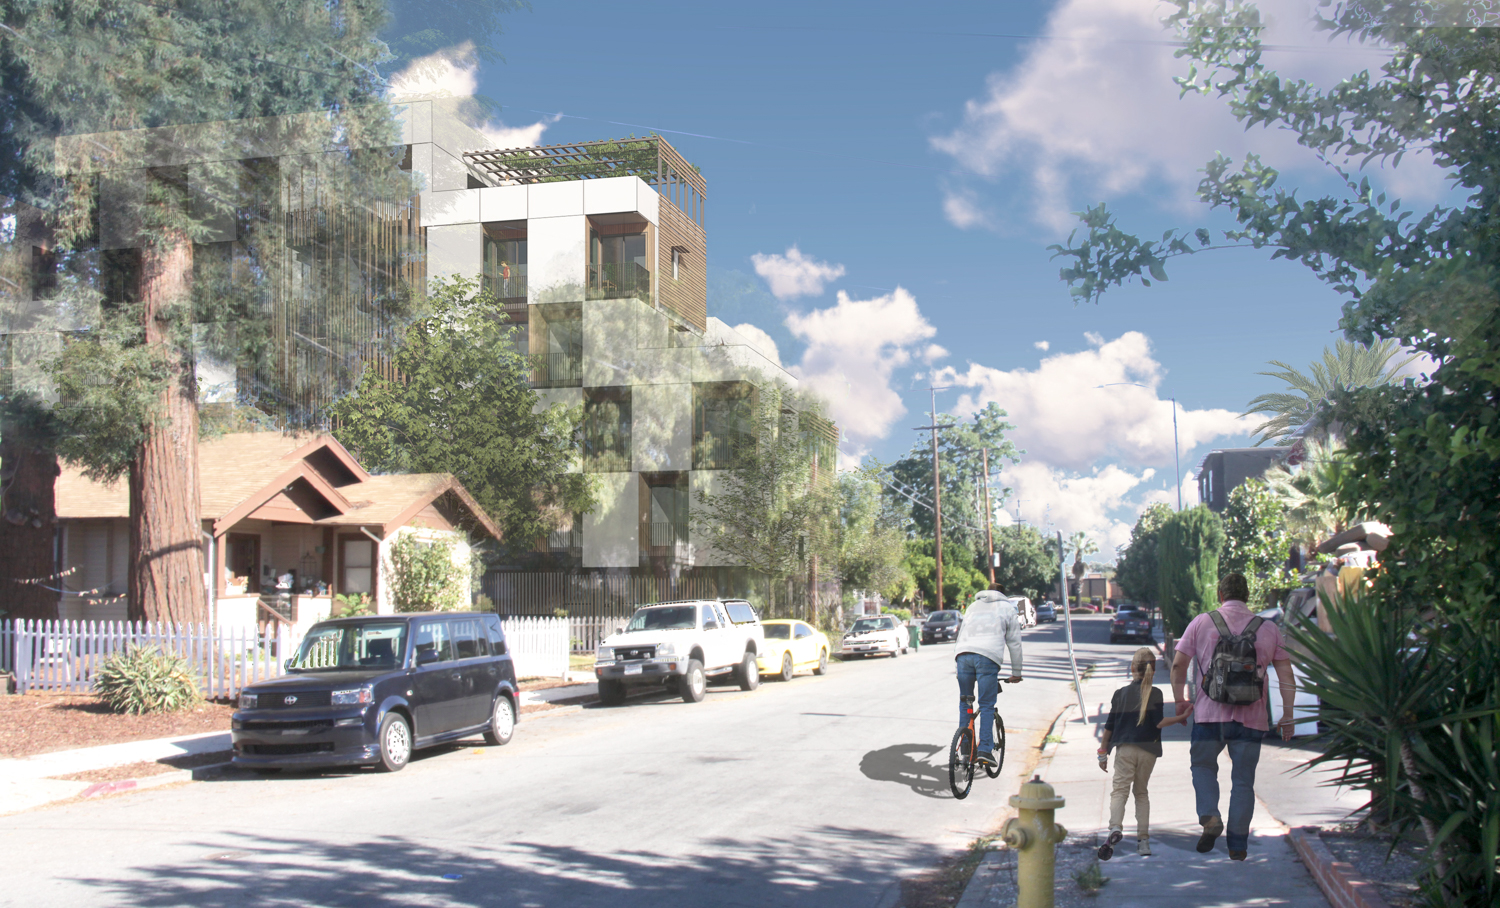 329 Page Street along the streetscape, rendering by David Baker Architects